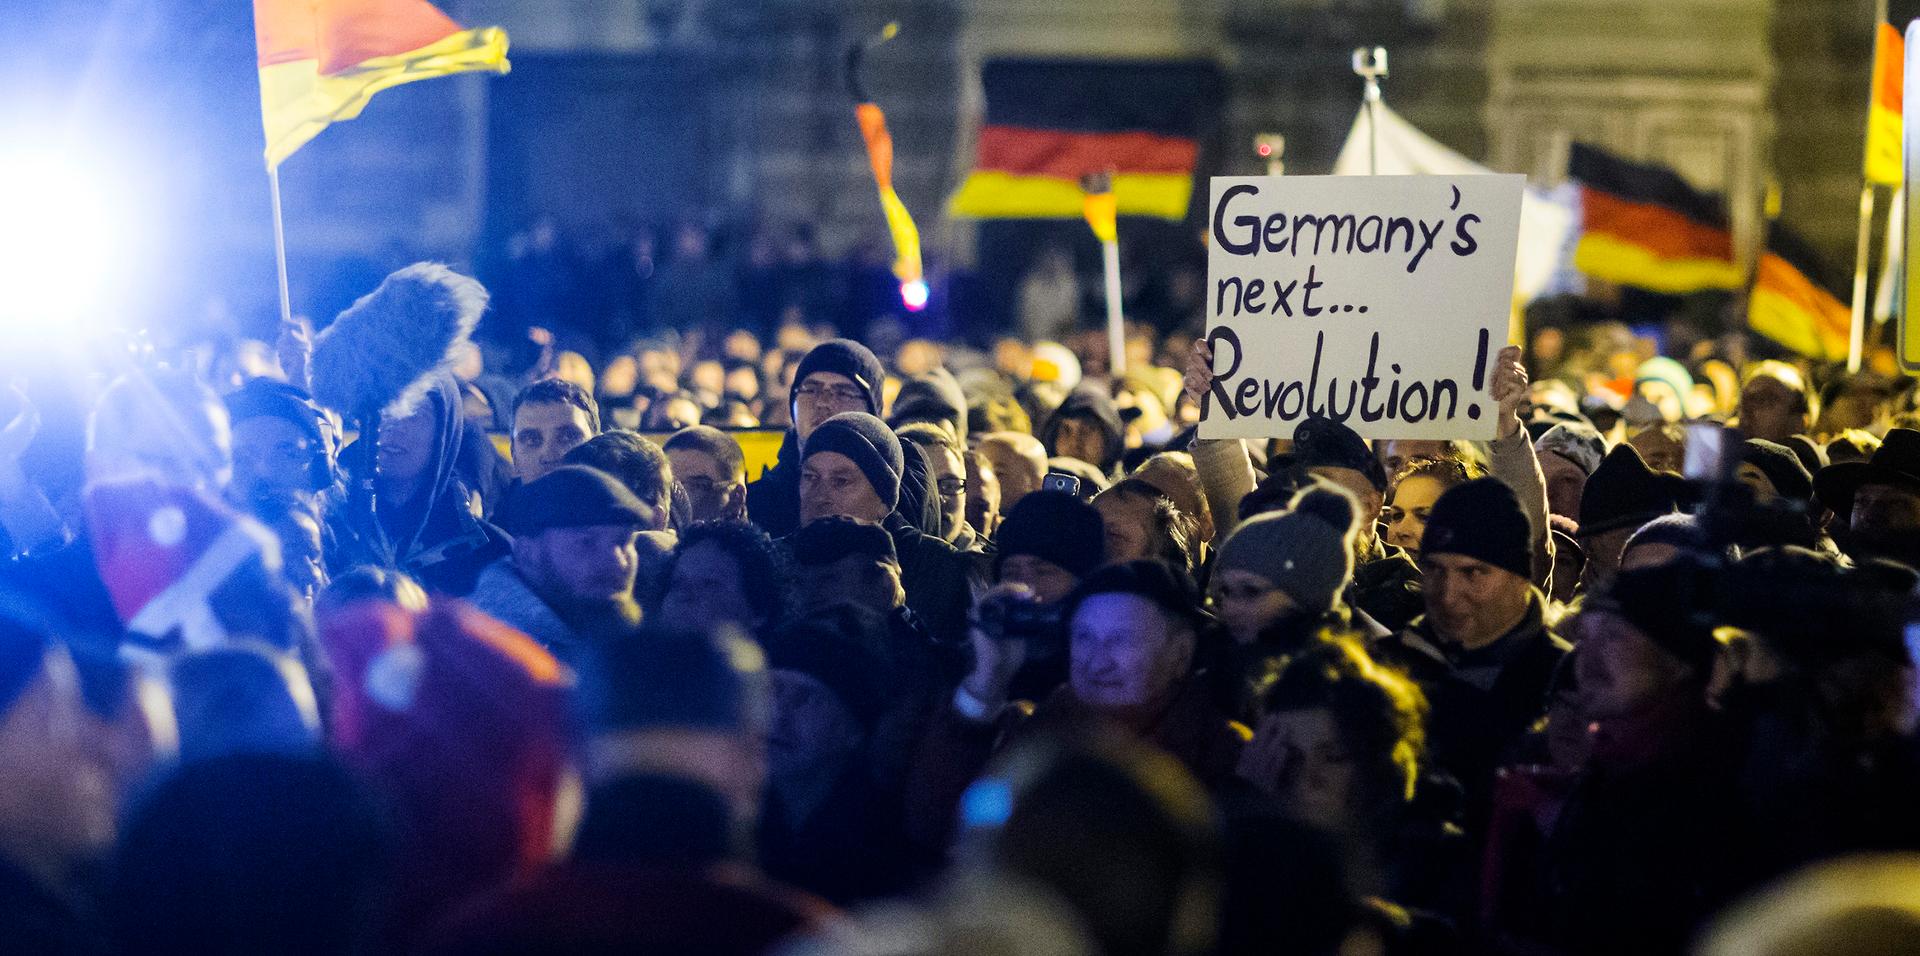 A woman holds a sign during a demonstration organised by anti-immigration group PEGIDA, a German abbreviation for "Patriotic Europeans against the Islamisation of the West", in Dresden December 22, 2014.